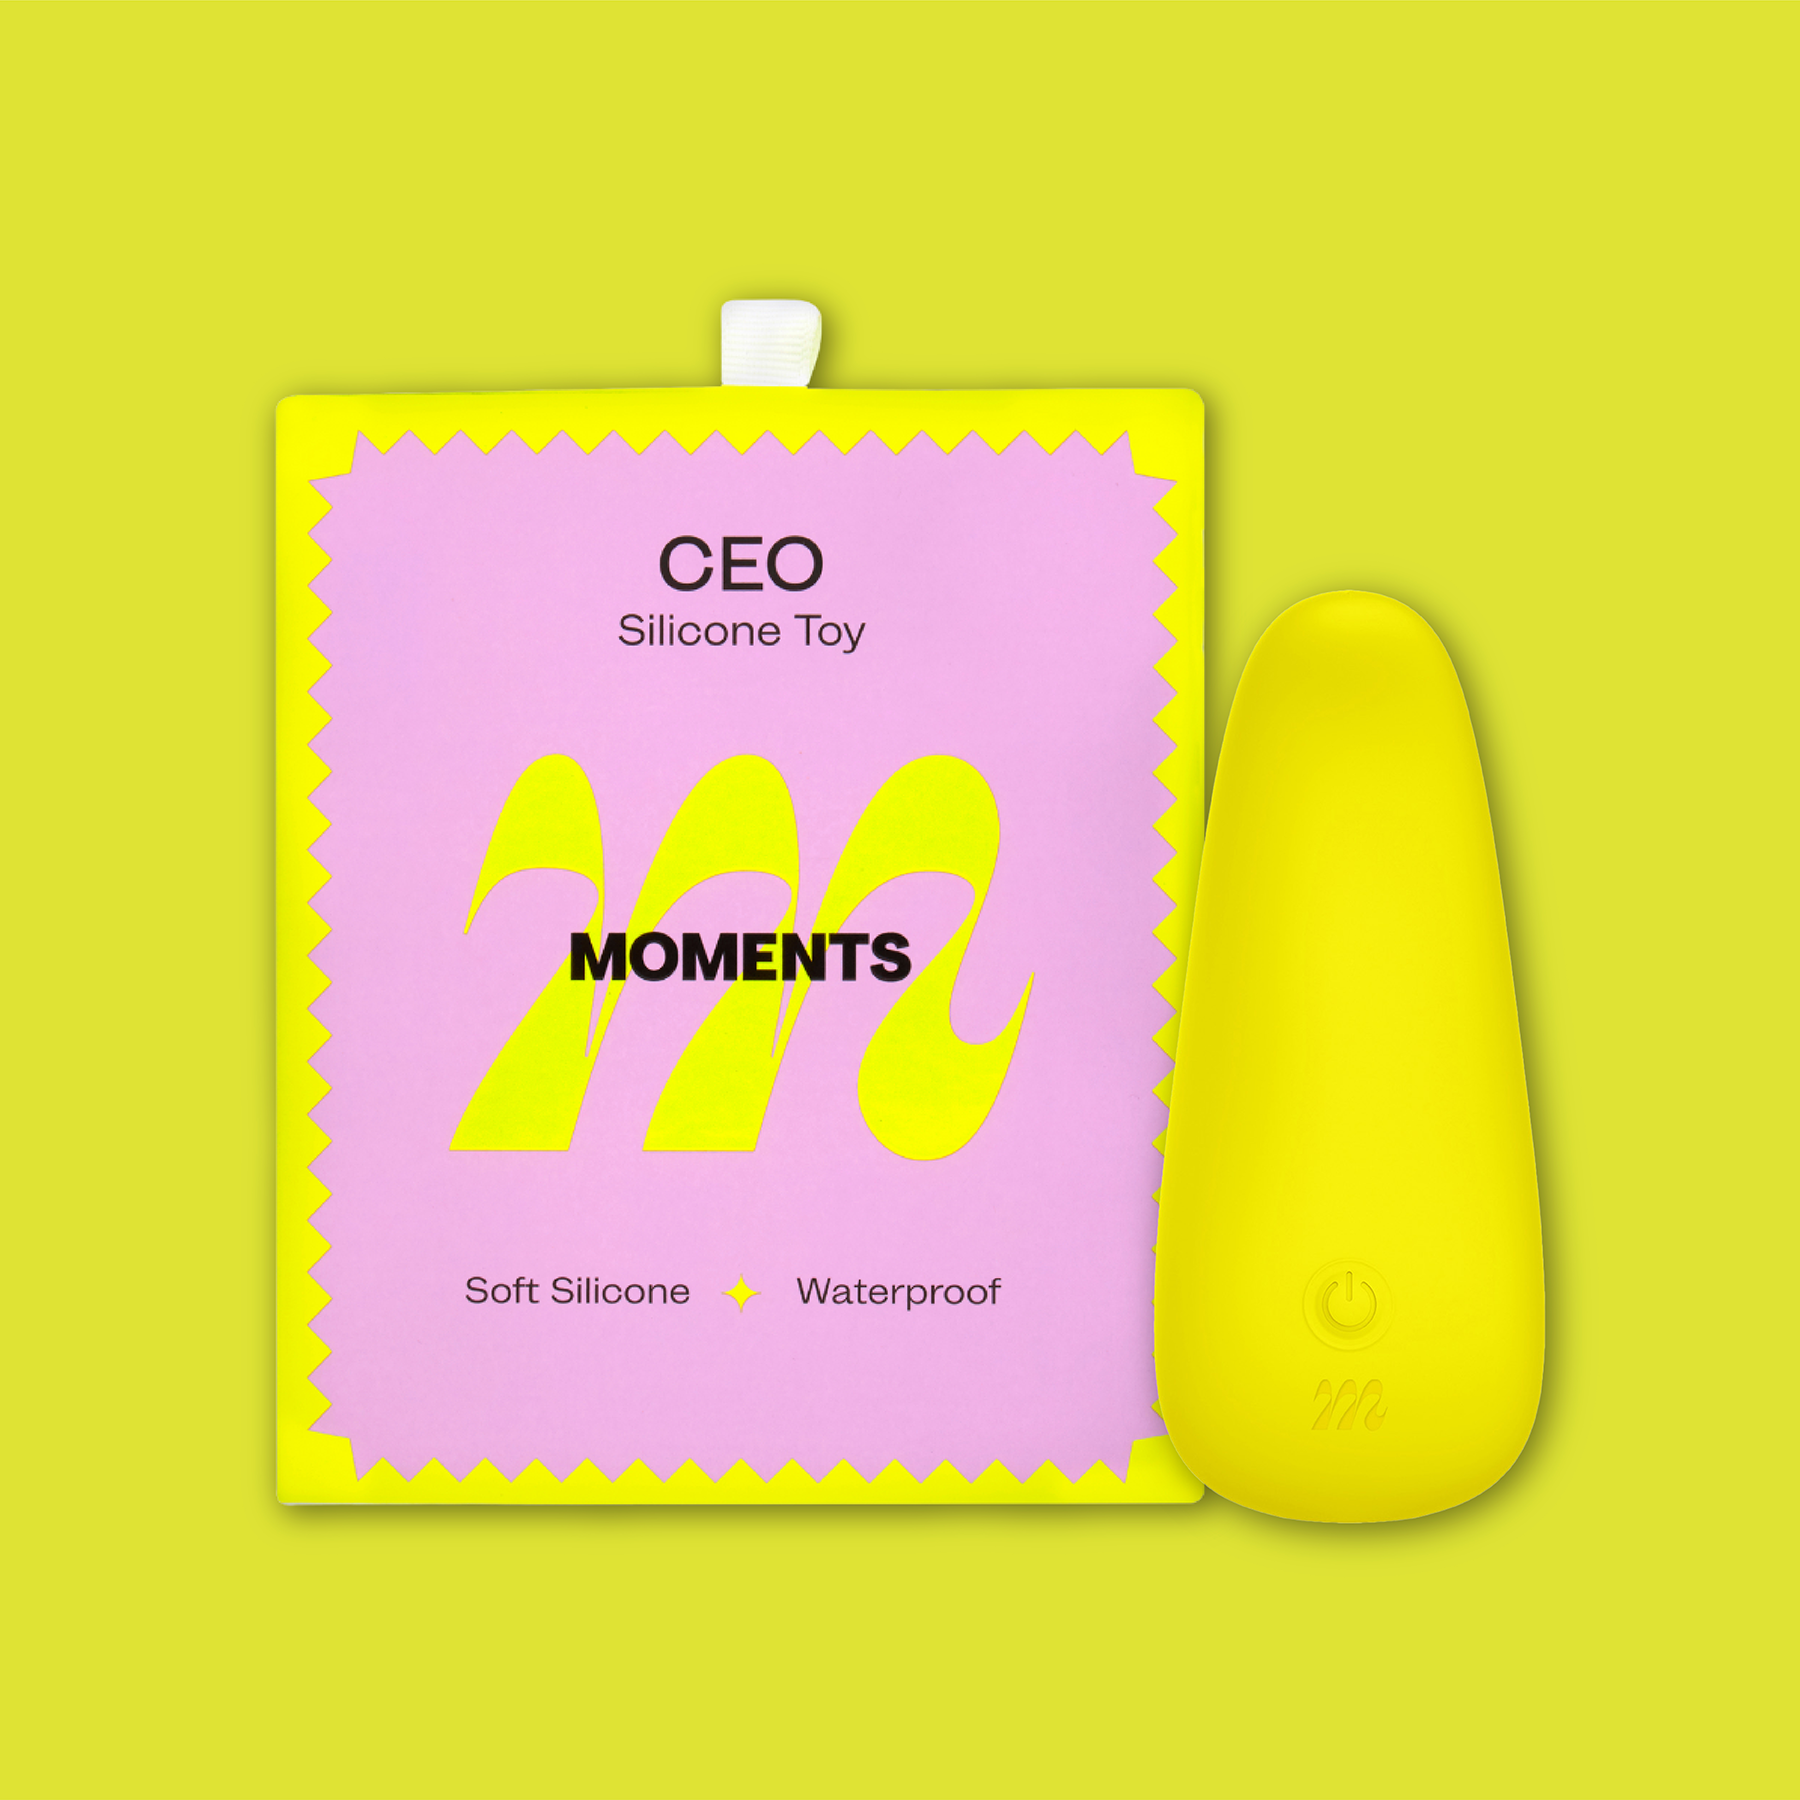 CEO soft silicone sex toy in distinctive yellow packaging